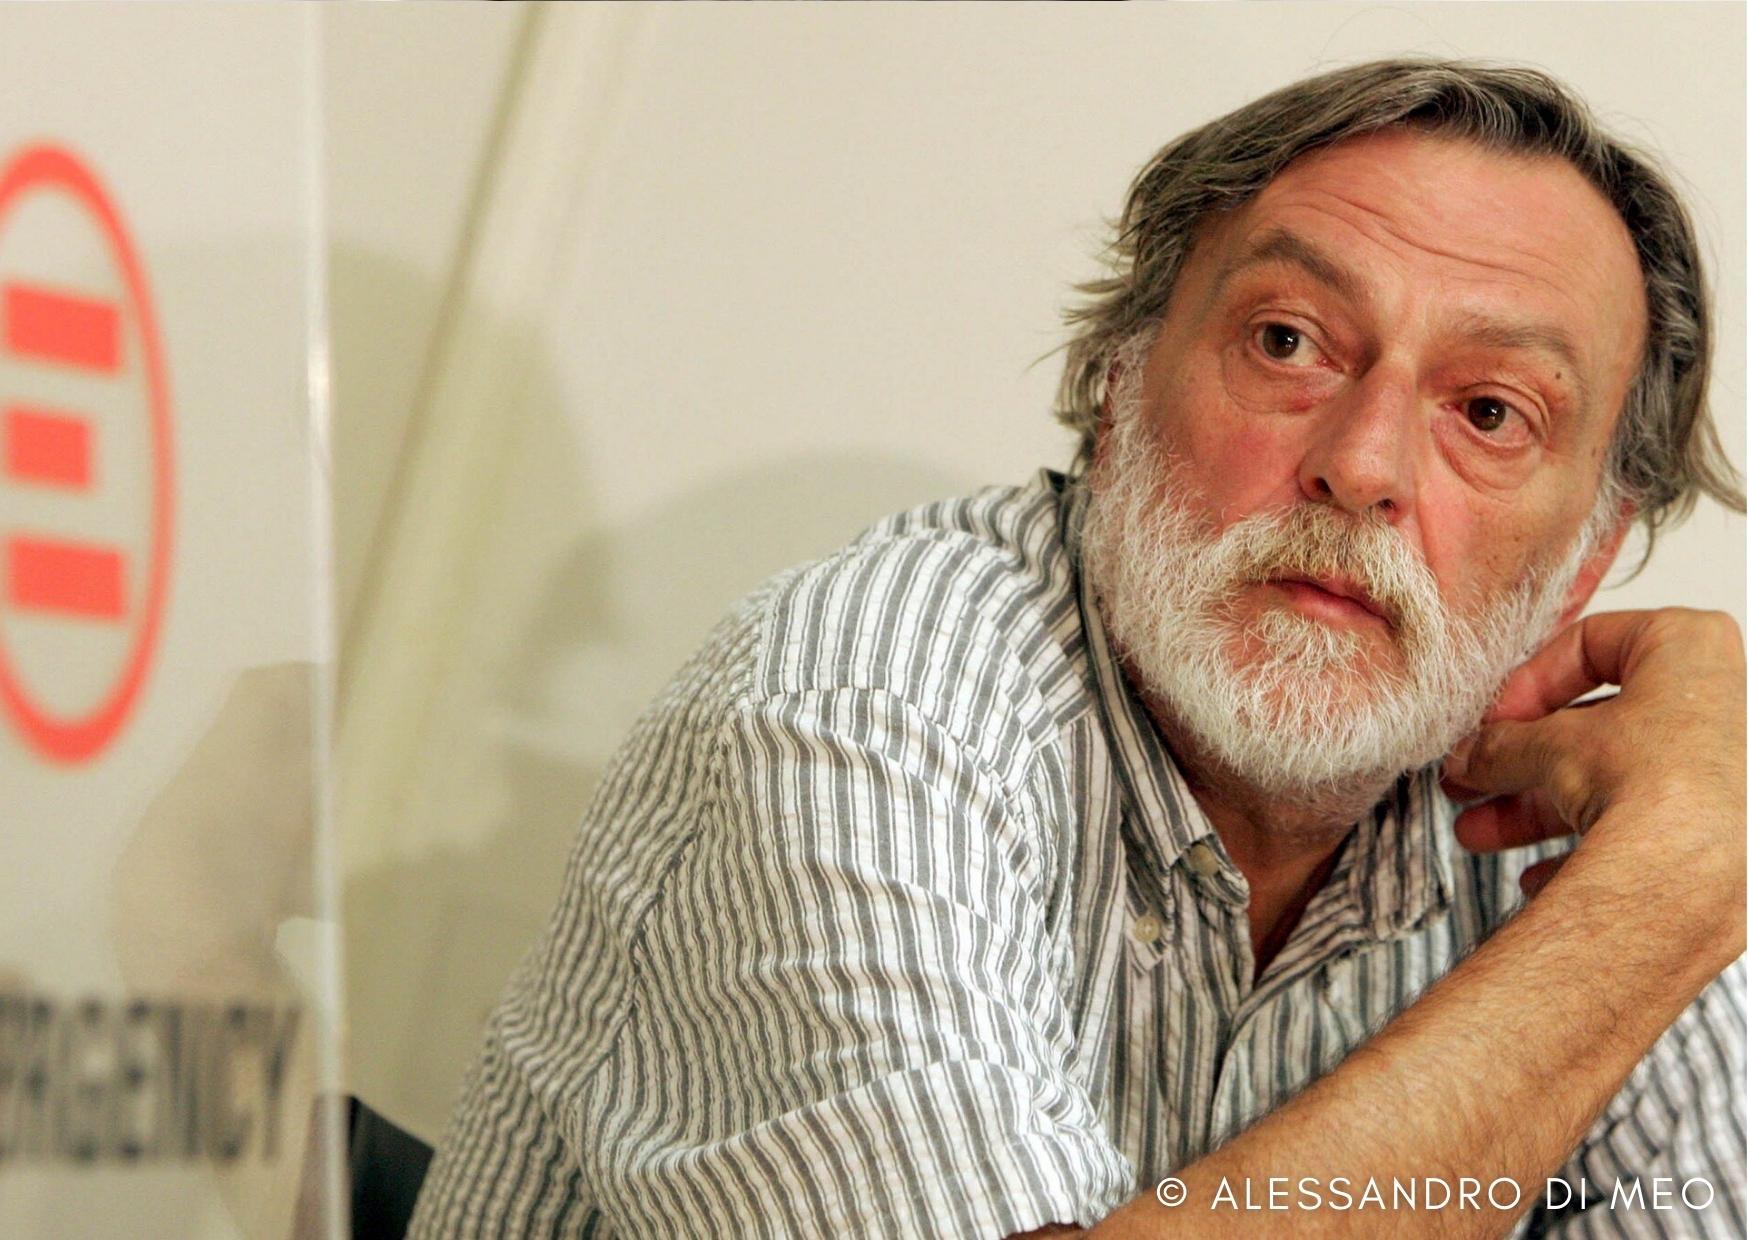 Dr. Gino Strada, Who Brought Health Care to the Desperate, Dies at 73 썸네일